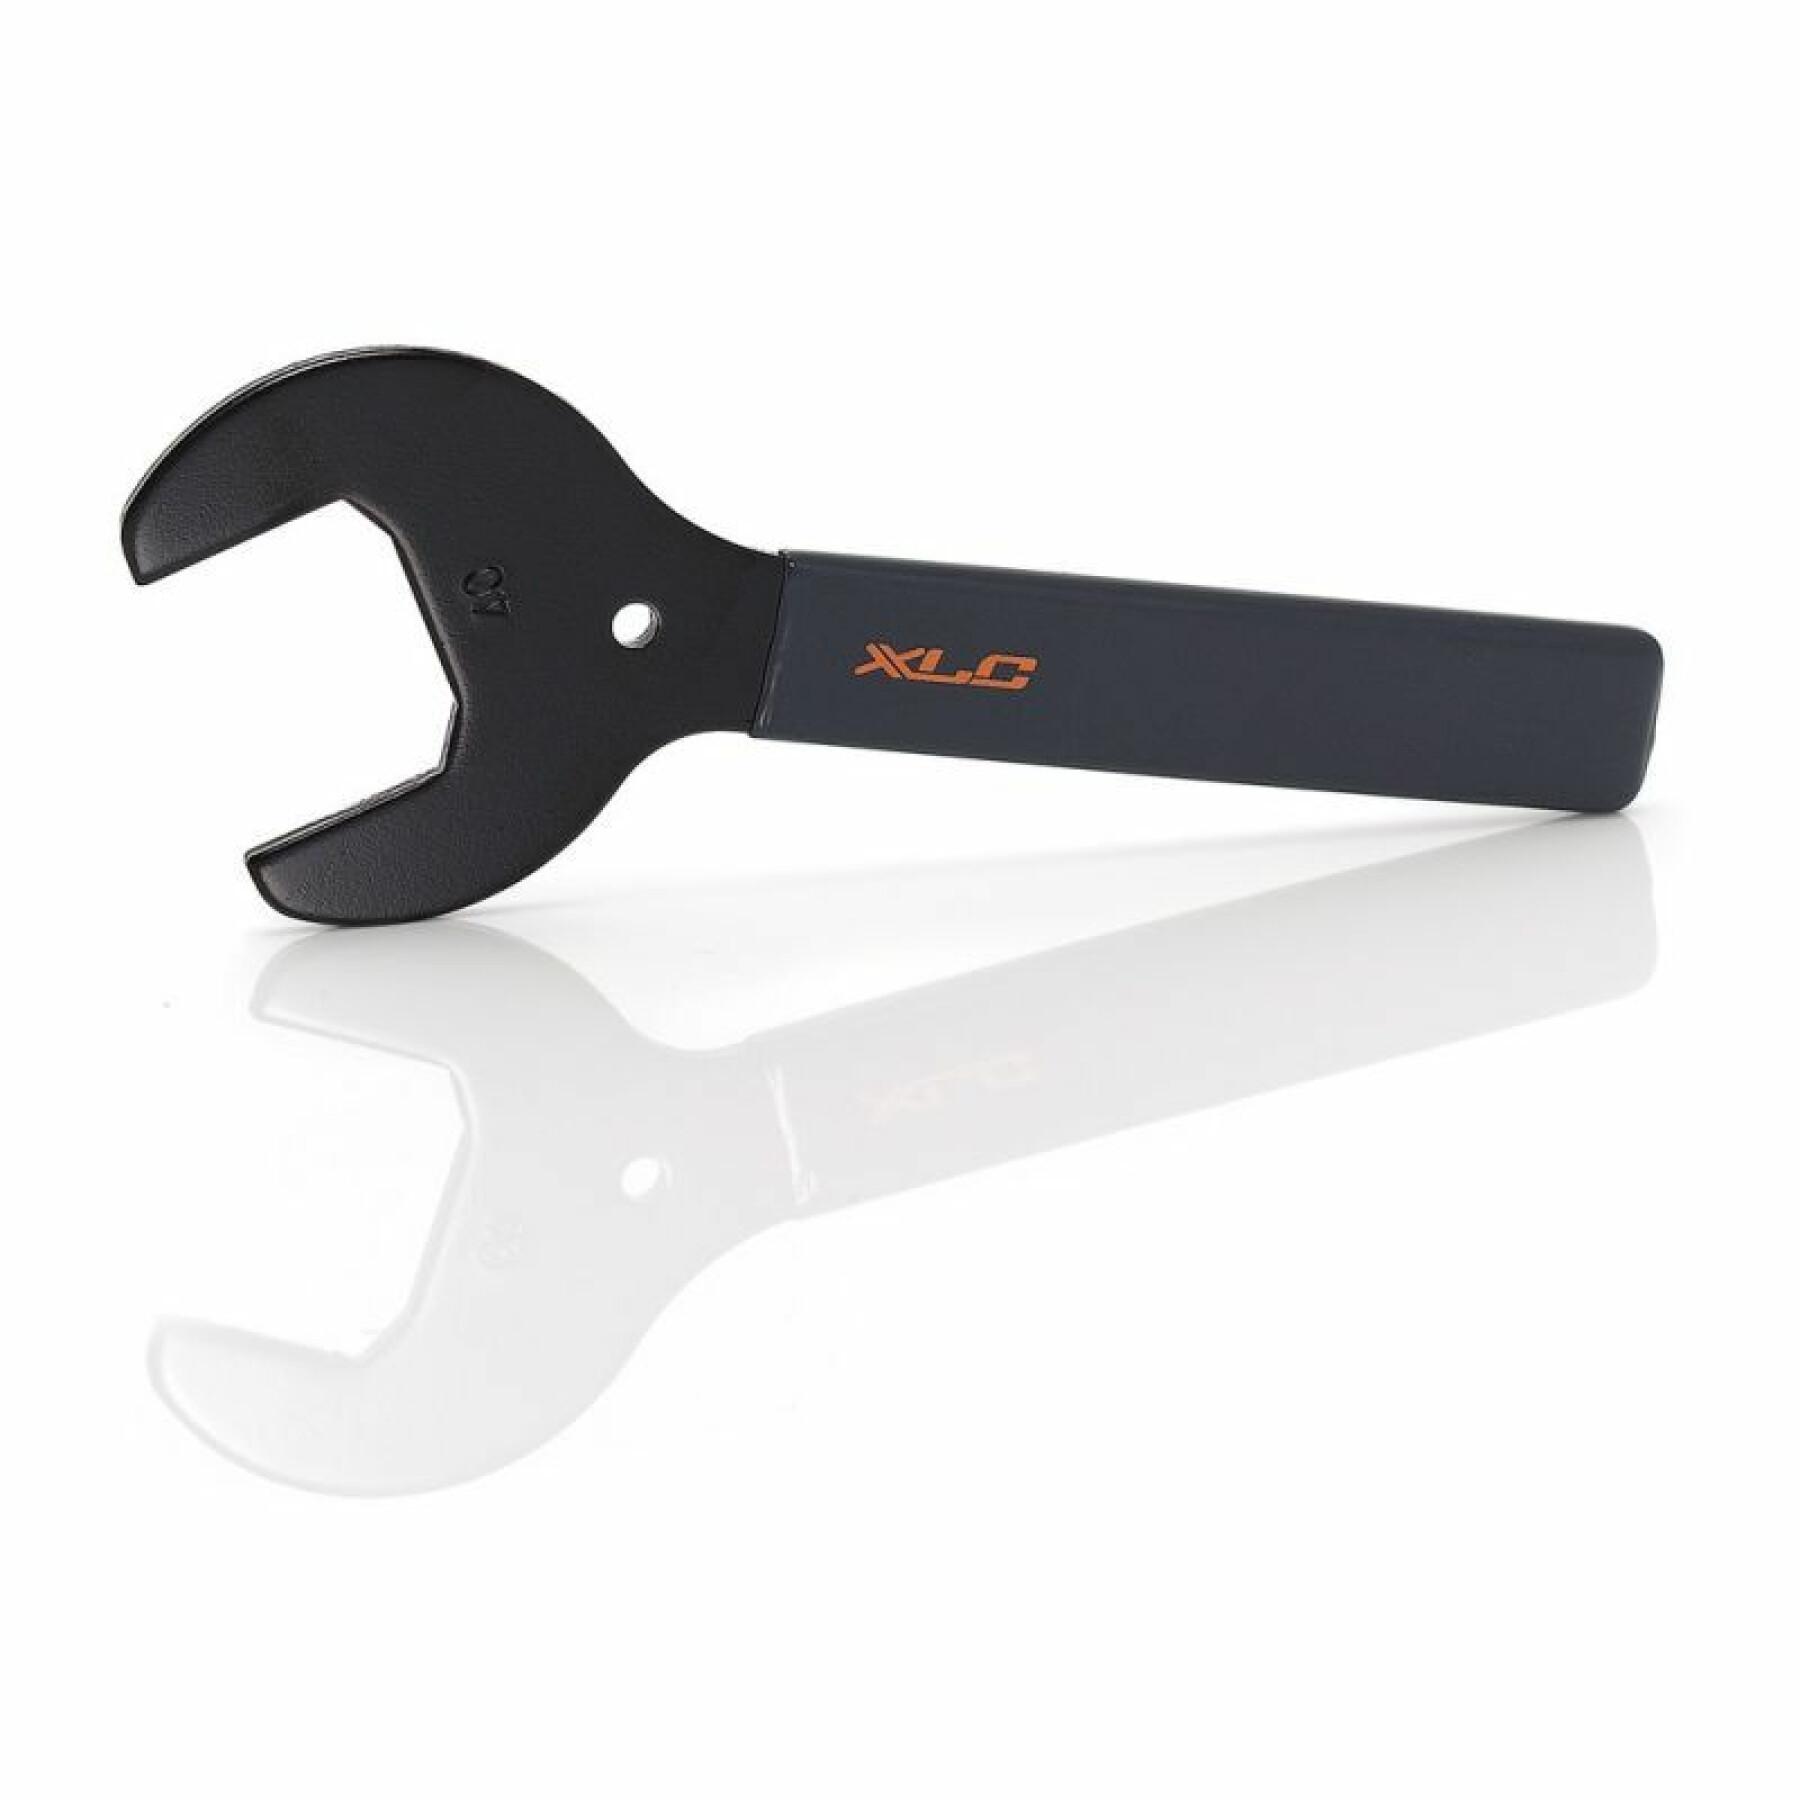 Cone wrench for headset XLC HS01 SB-Plus